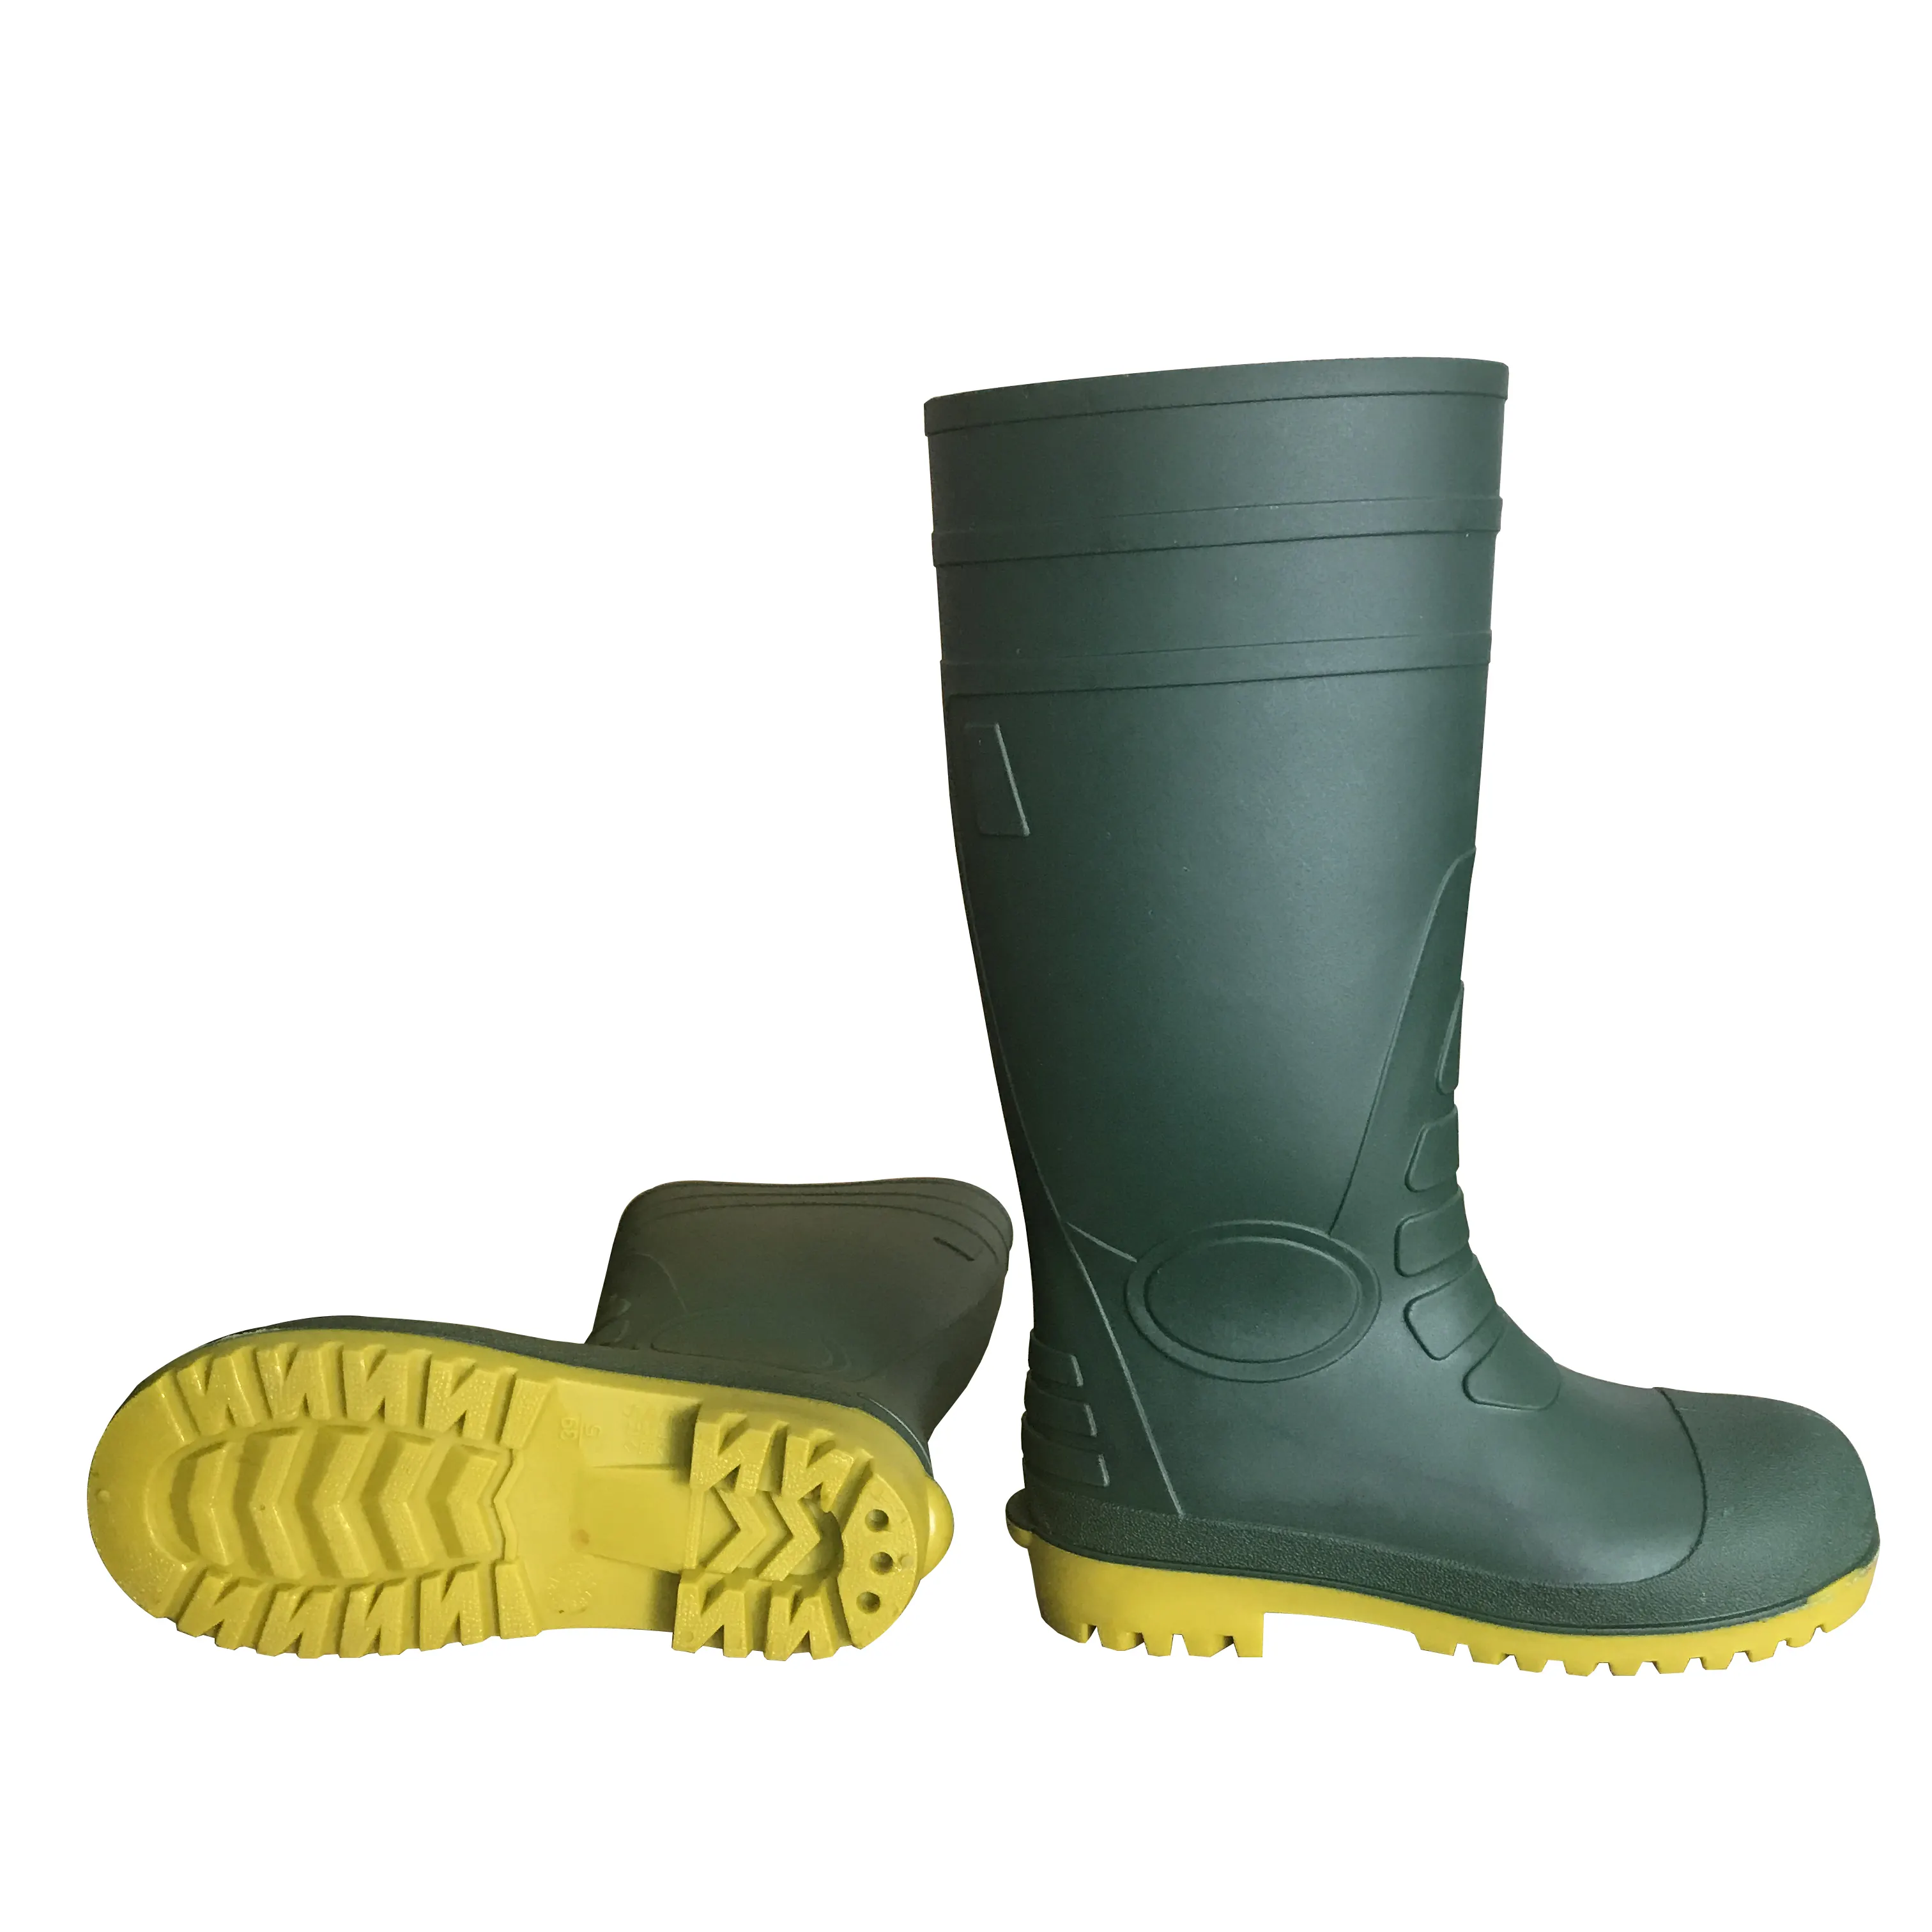 High quality low price waterproof men work PVC safety gumboots rain boots with steel toe